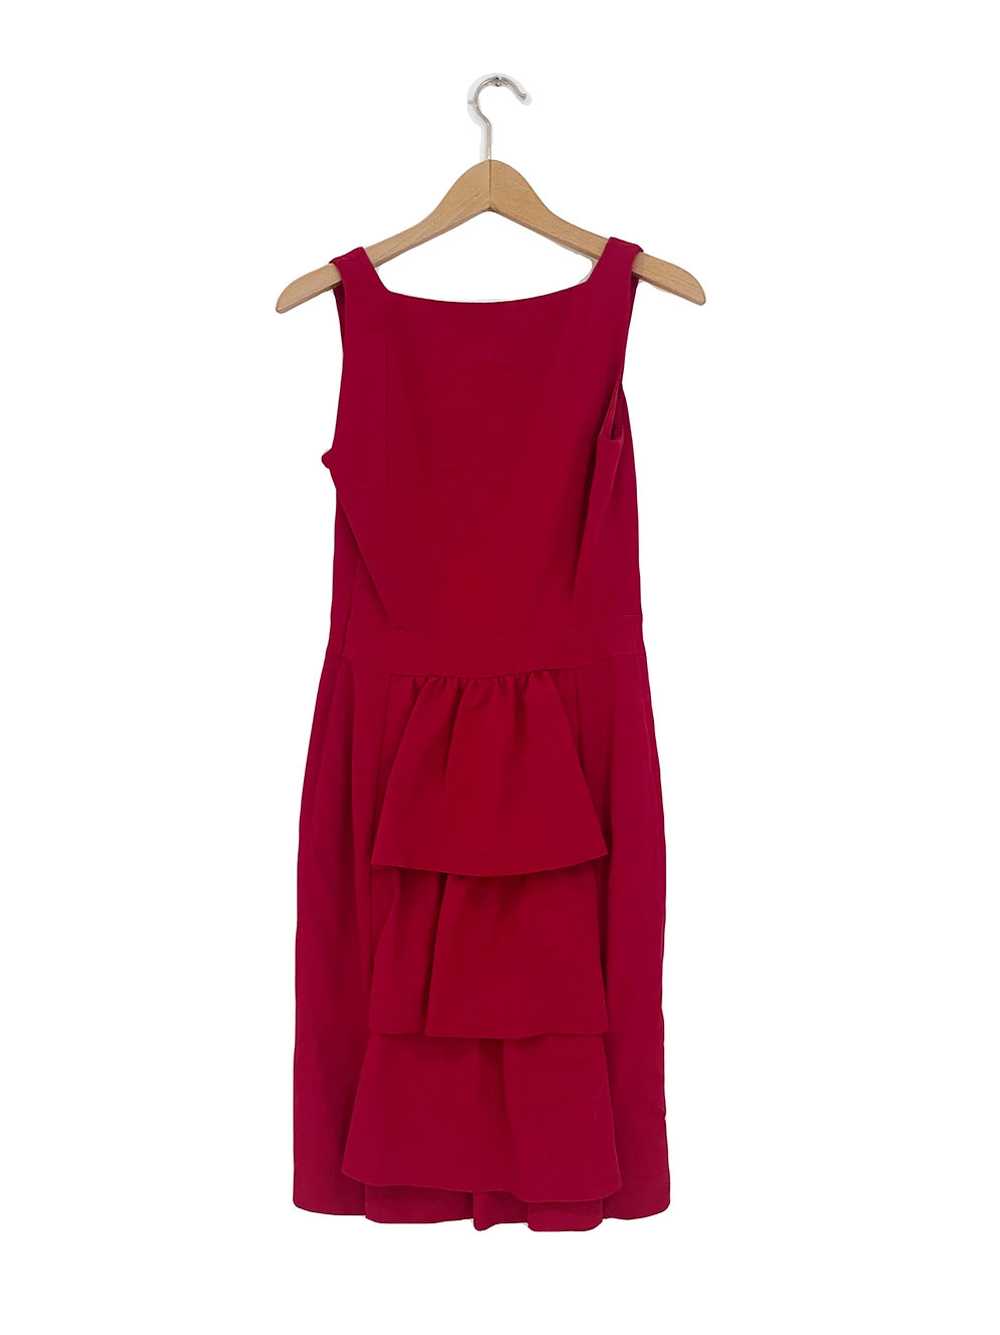 New With Tags Reiss Milly Dress UK 6 - image 2